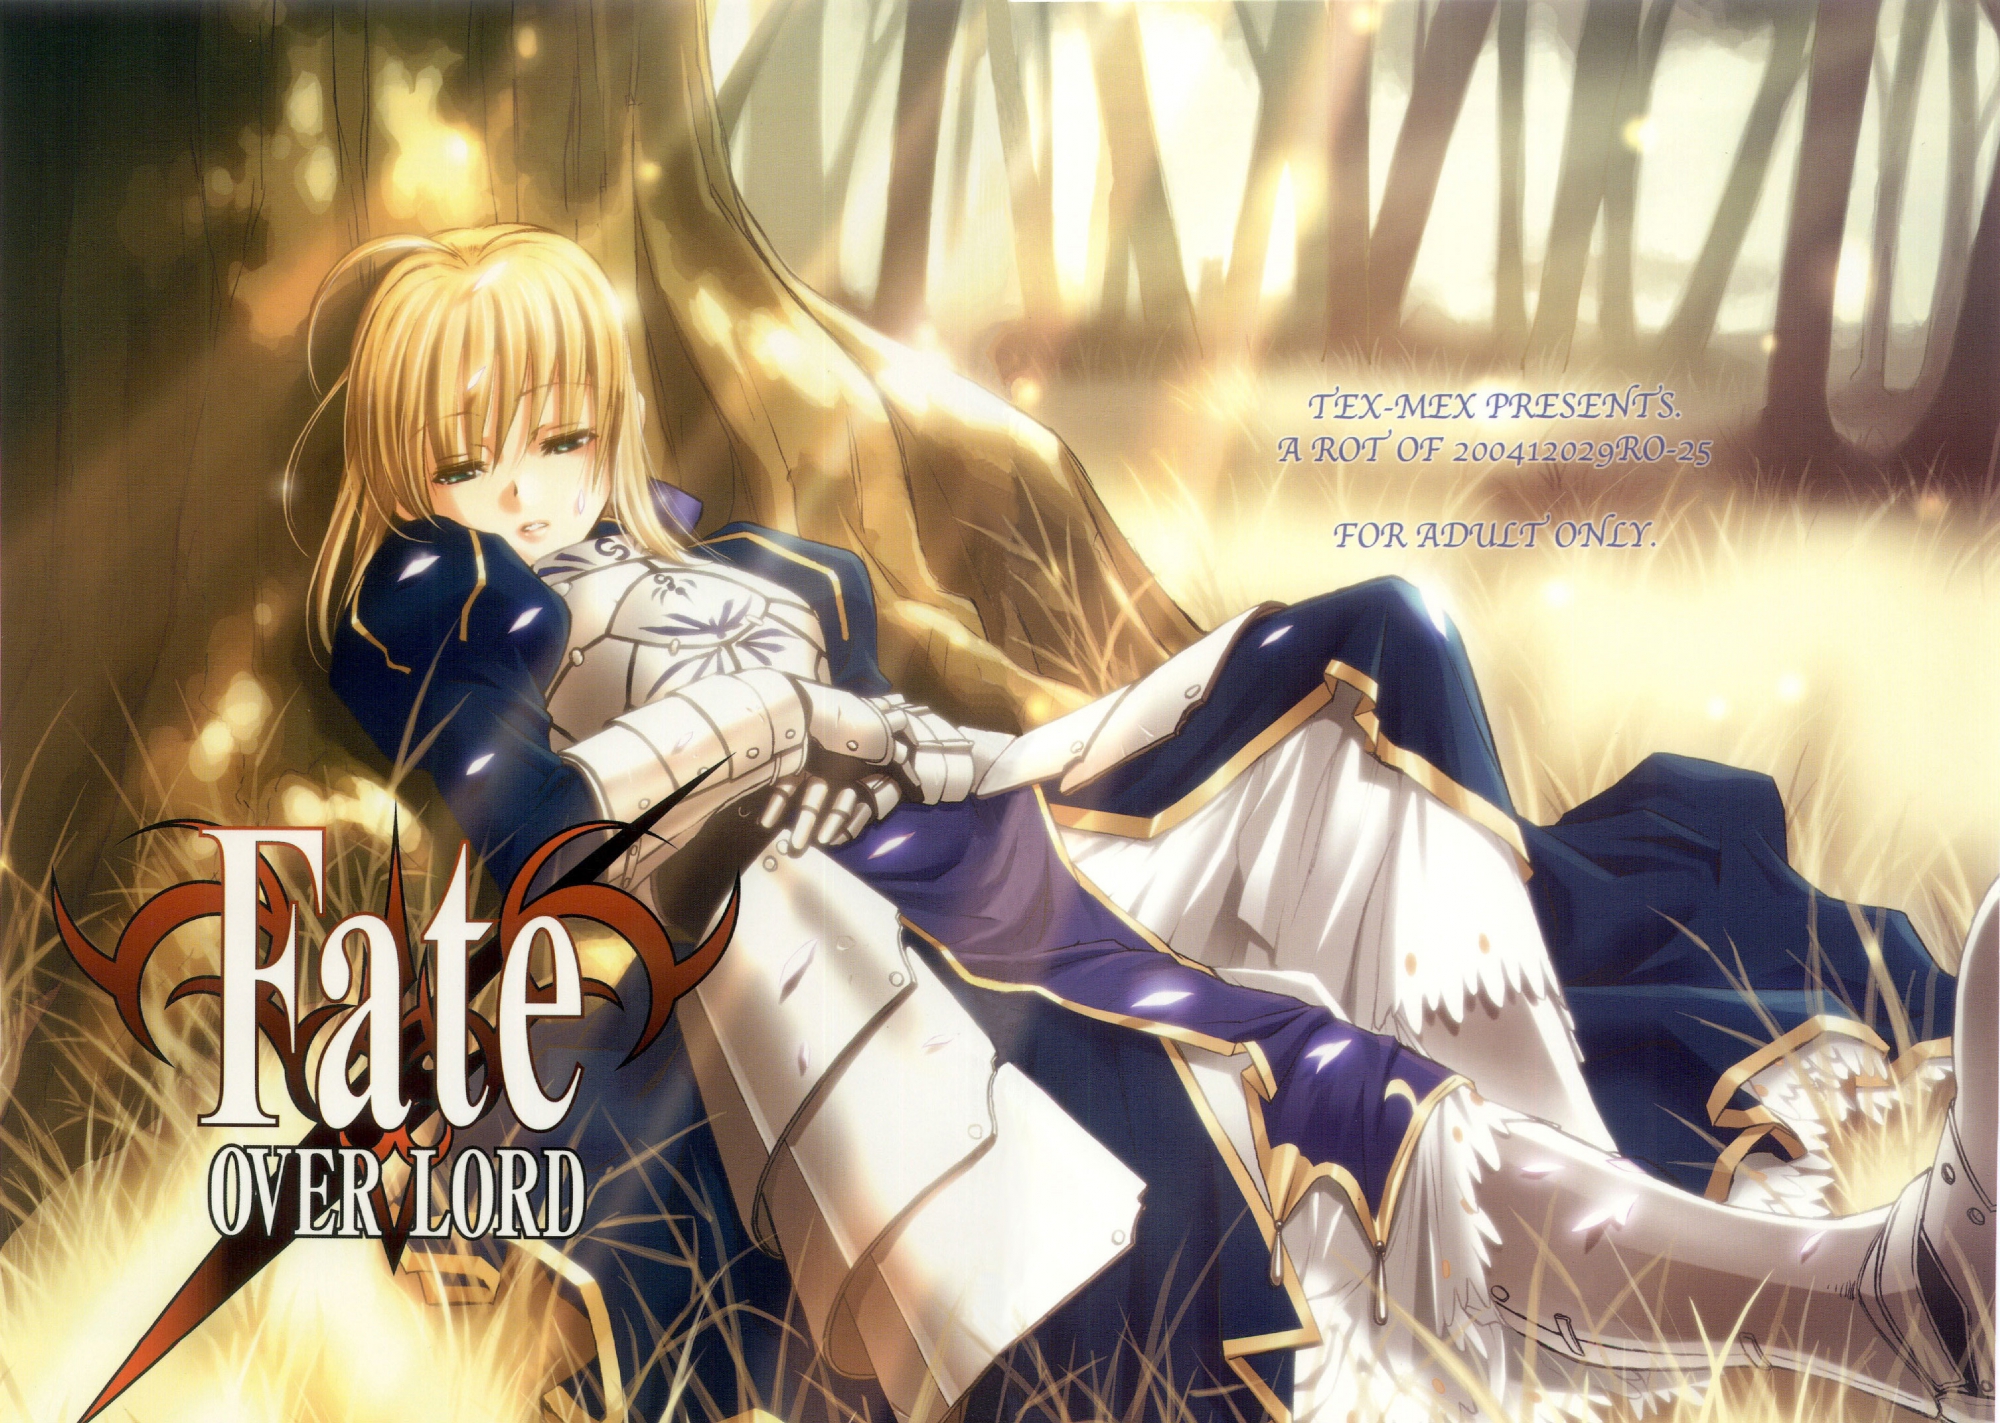 Saber (Fate/Stay Night) - wide 3